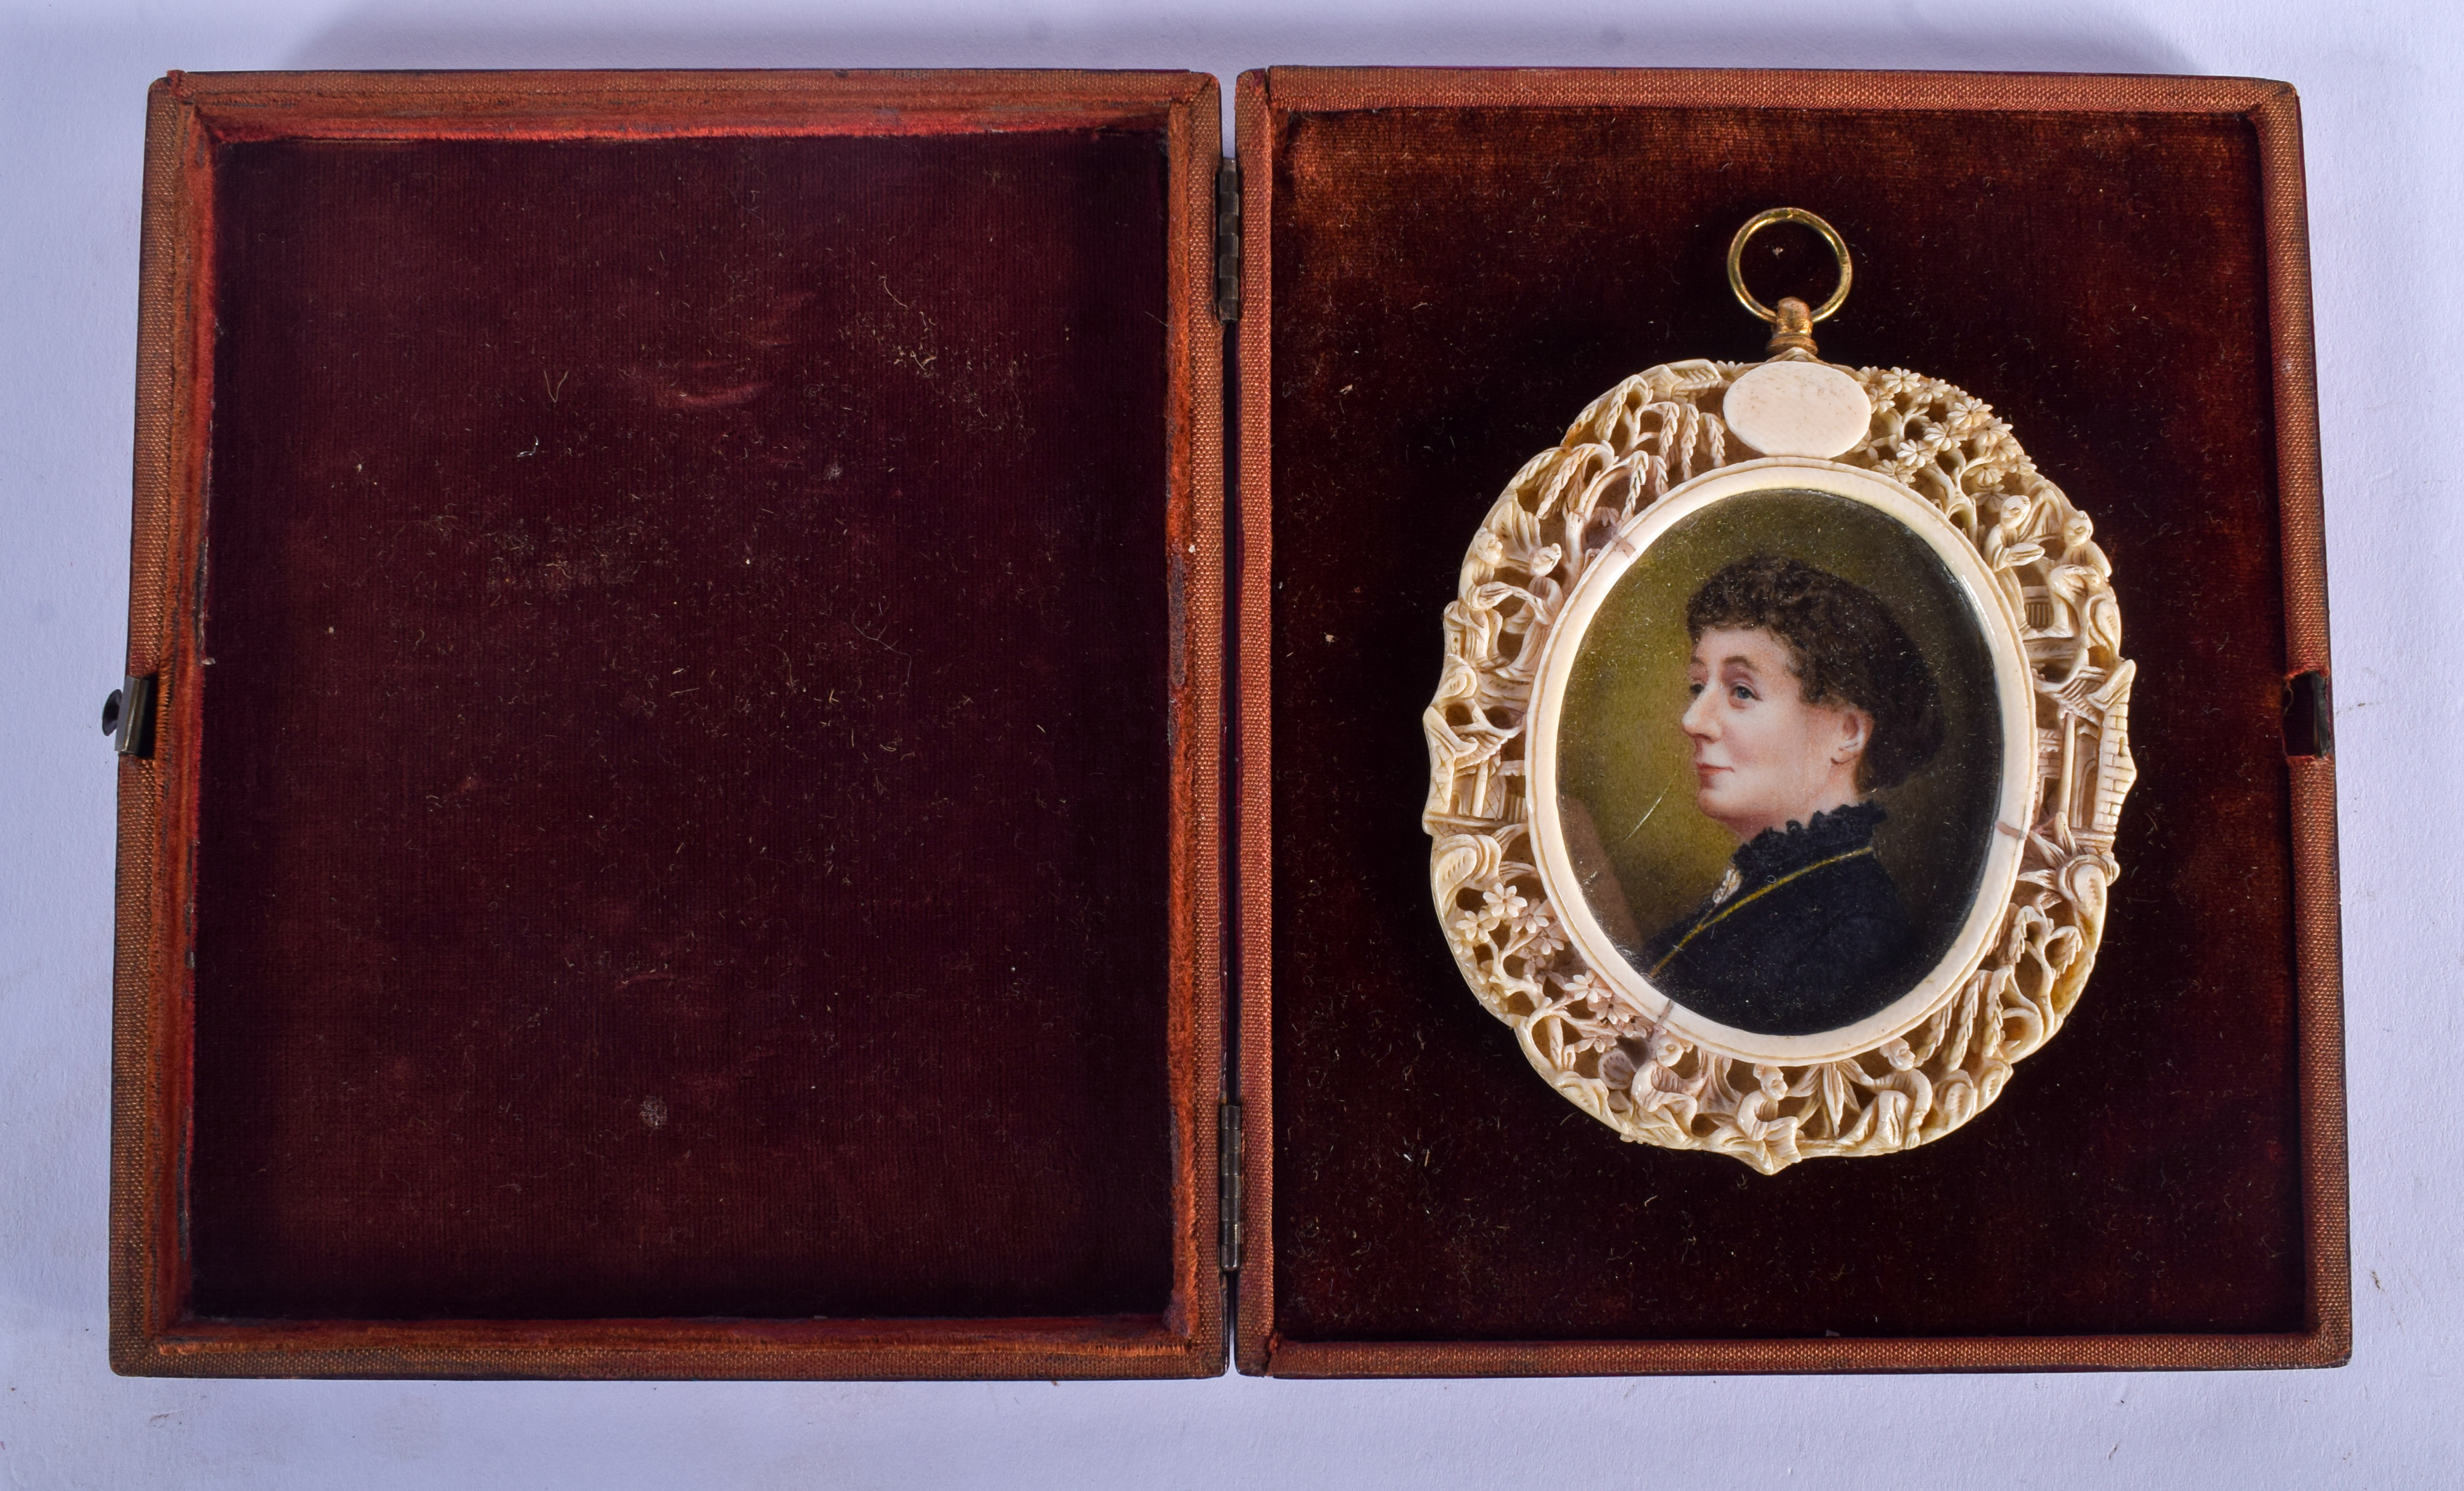 A 19TH CENTURY EUROPEAN CARVED IVORY PORTRAIT MINIATURE contained within a Qing dynasty ivory frame - Image 3 of 3